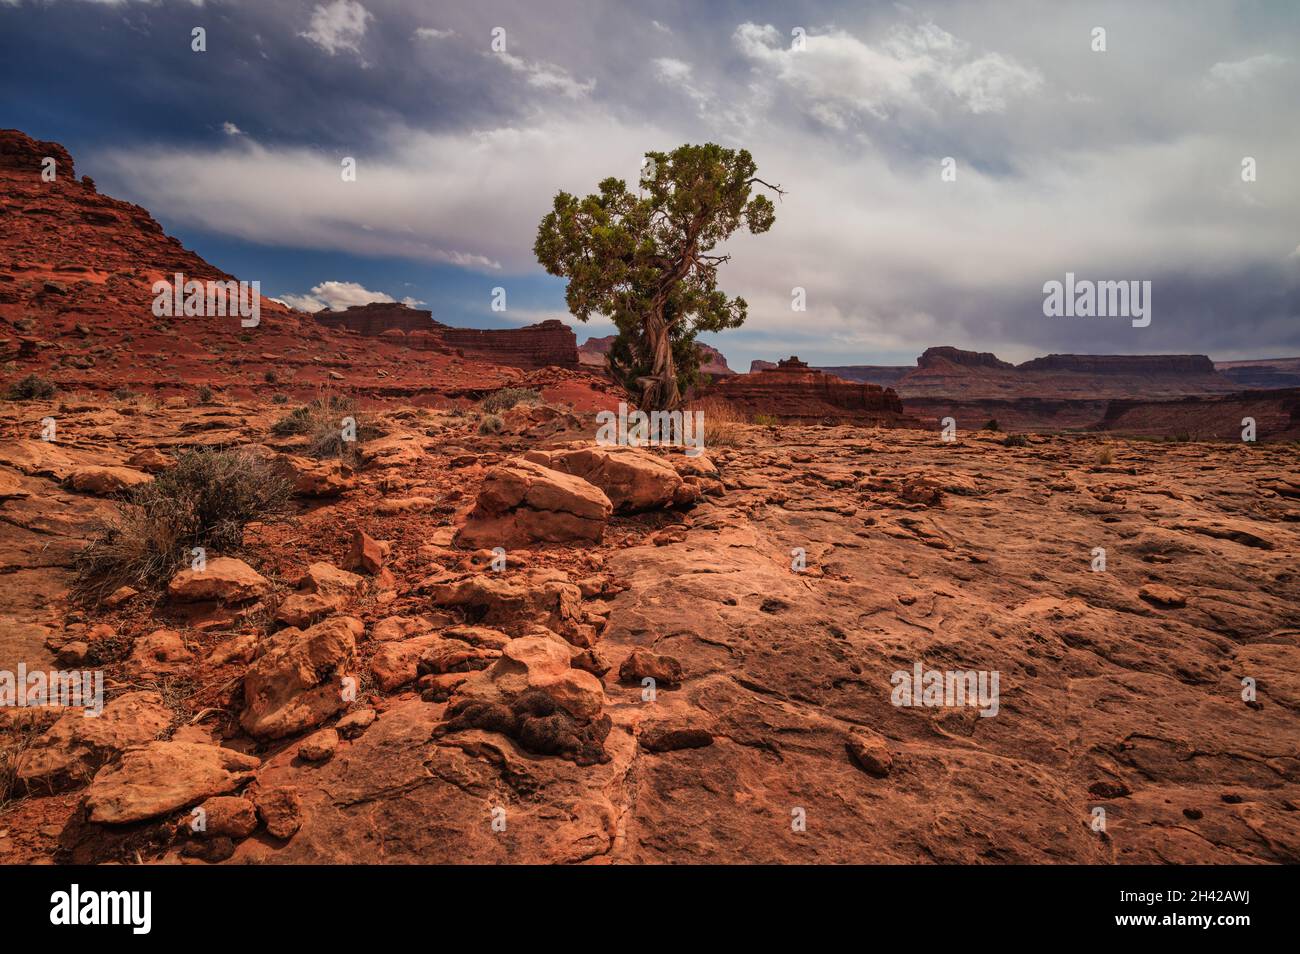 Vibrant red rocks utah landscape with one tree Stock Photo